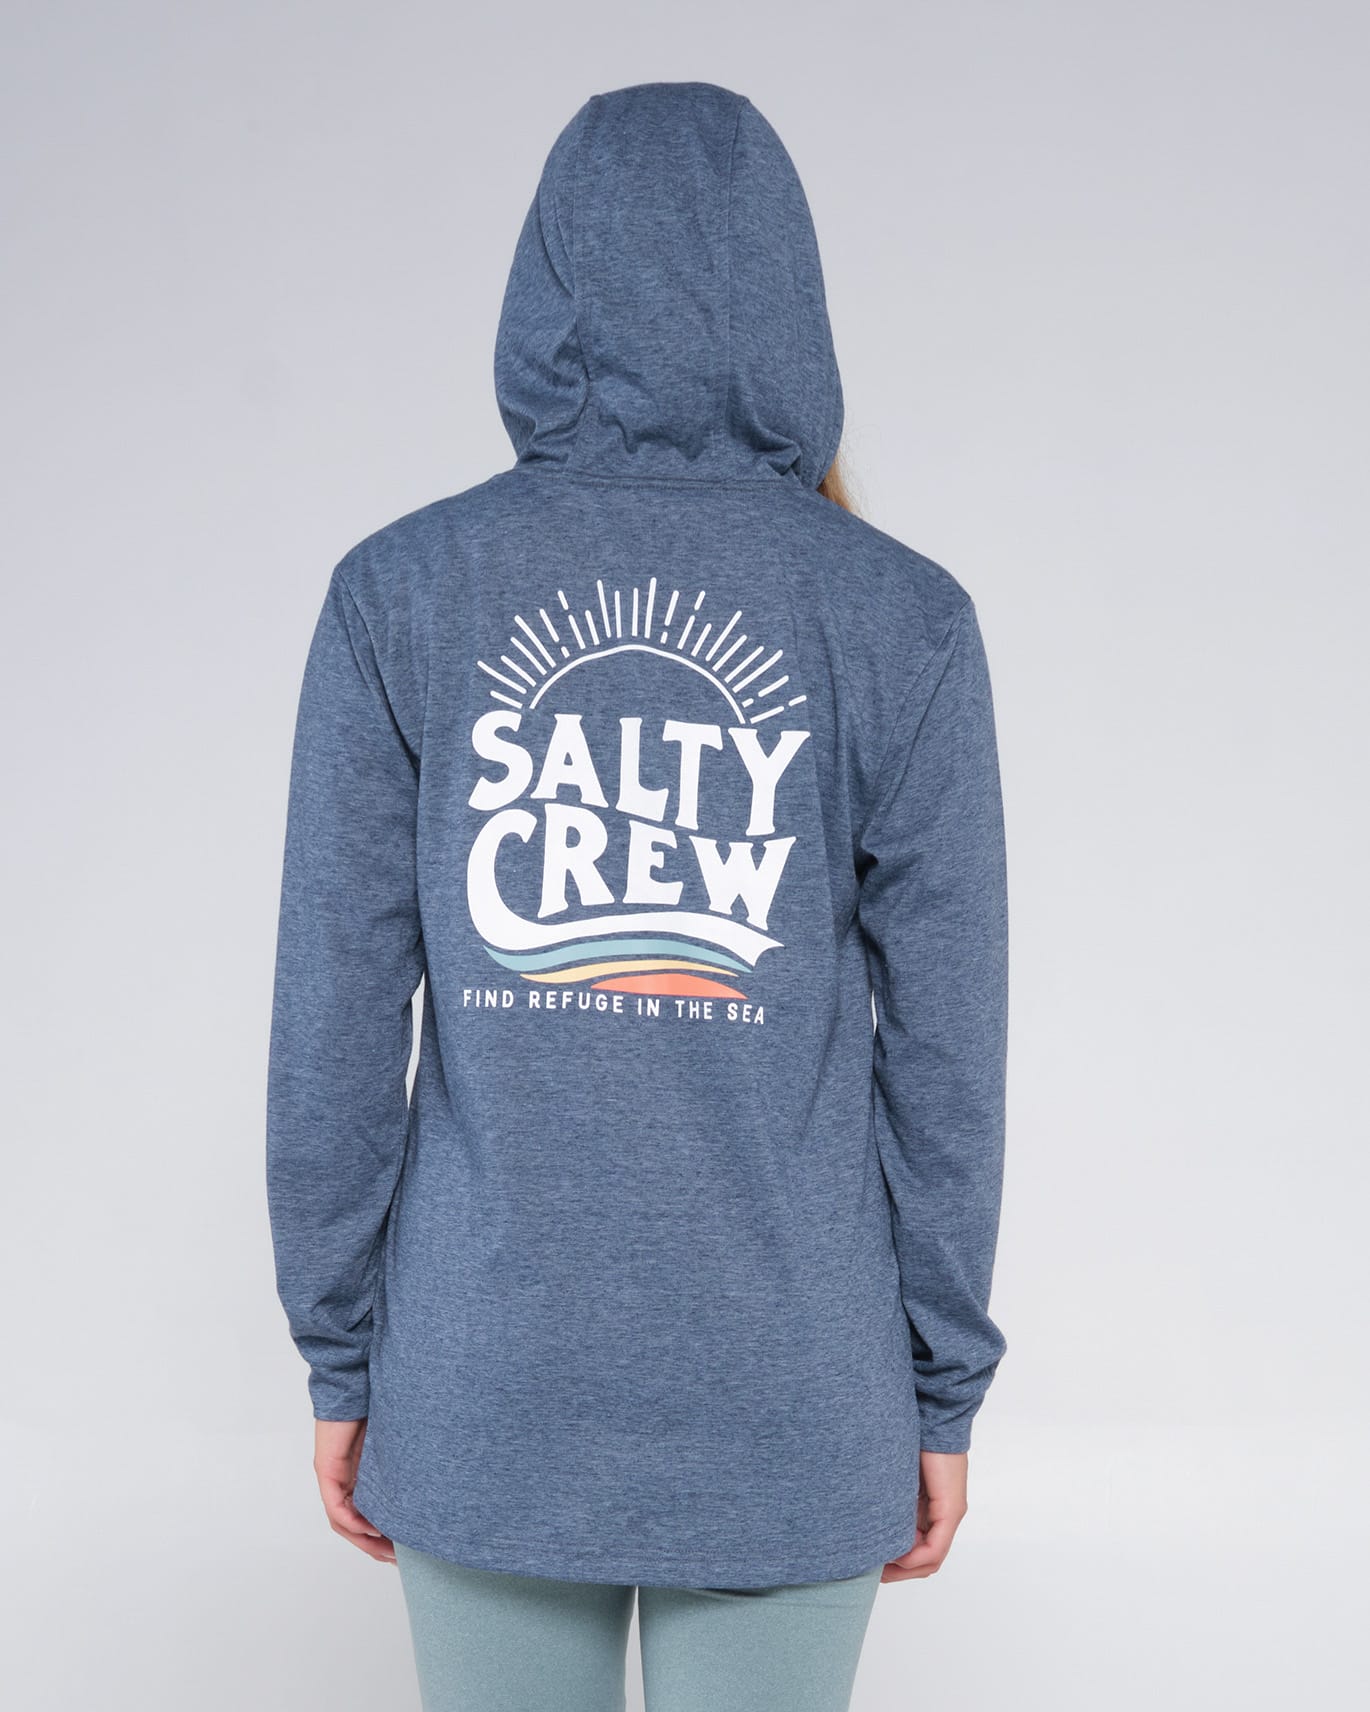 Salty crew SUN PROTECTION THE WAVE MID WEIGHT HOODY - Navy in Navy